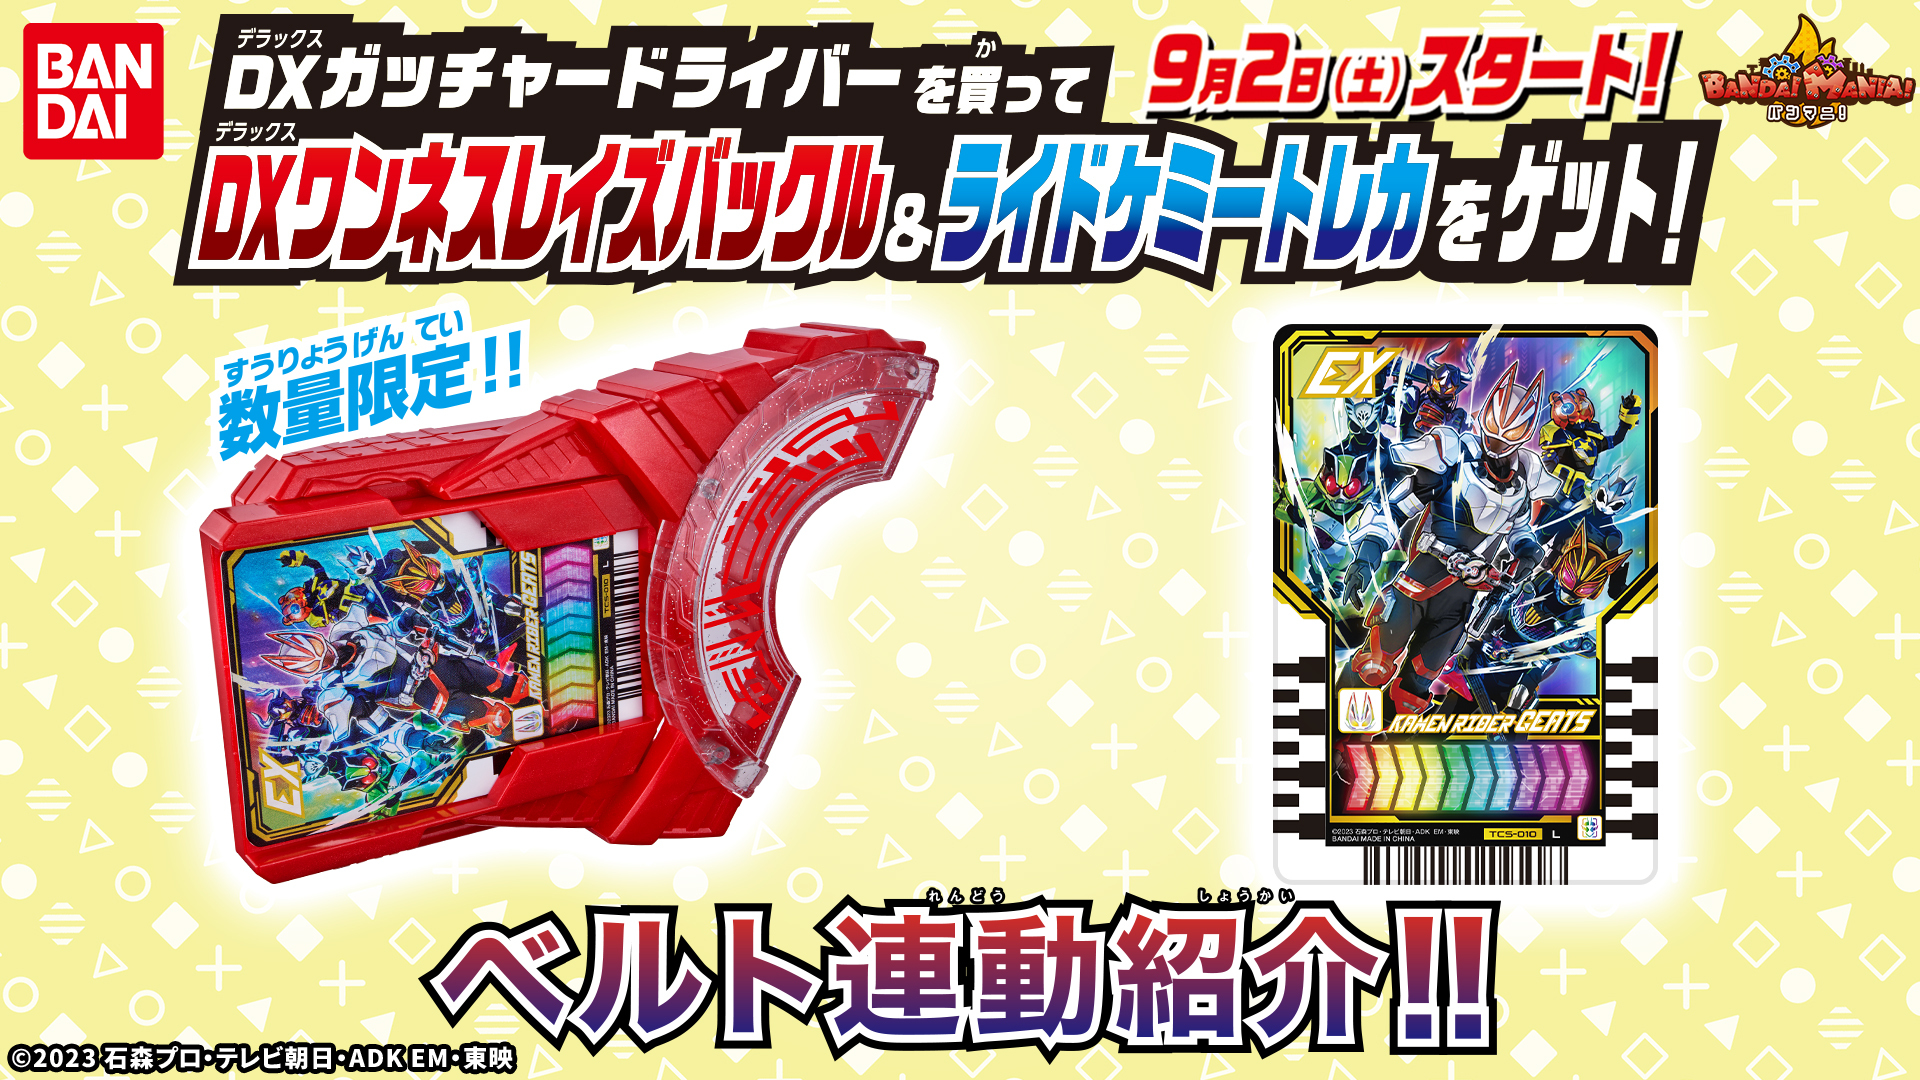 [Banmani!] Buy the DX GOTCHARDRIVER and get the DX Oneness Raise Buckle and RIDE CHEMY TRADING CARD!